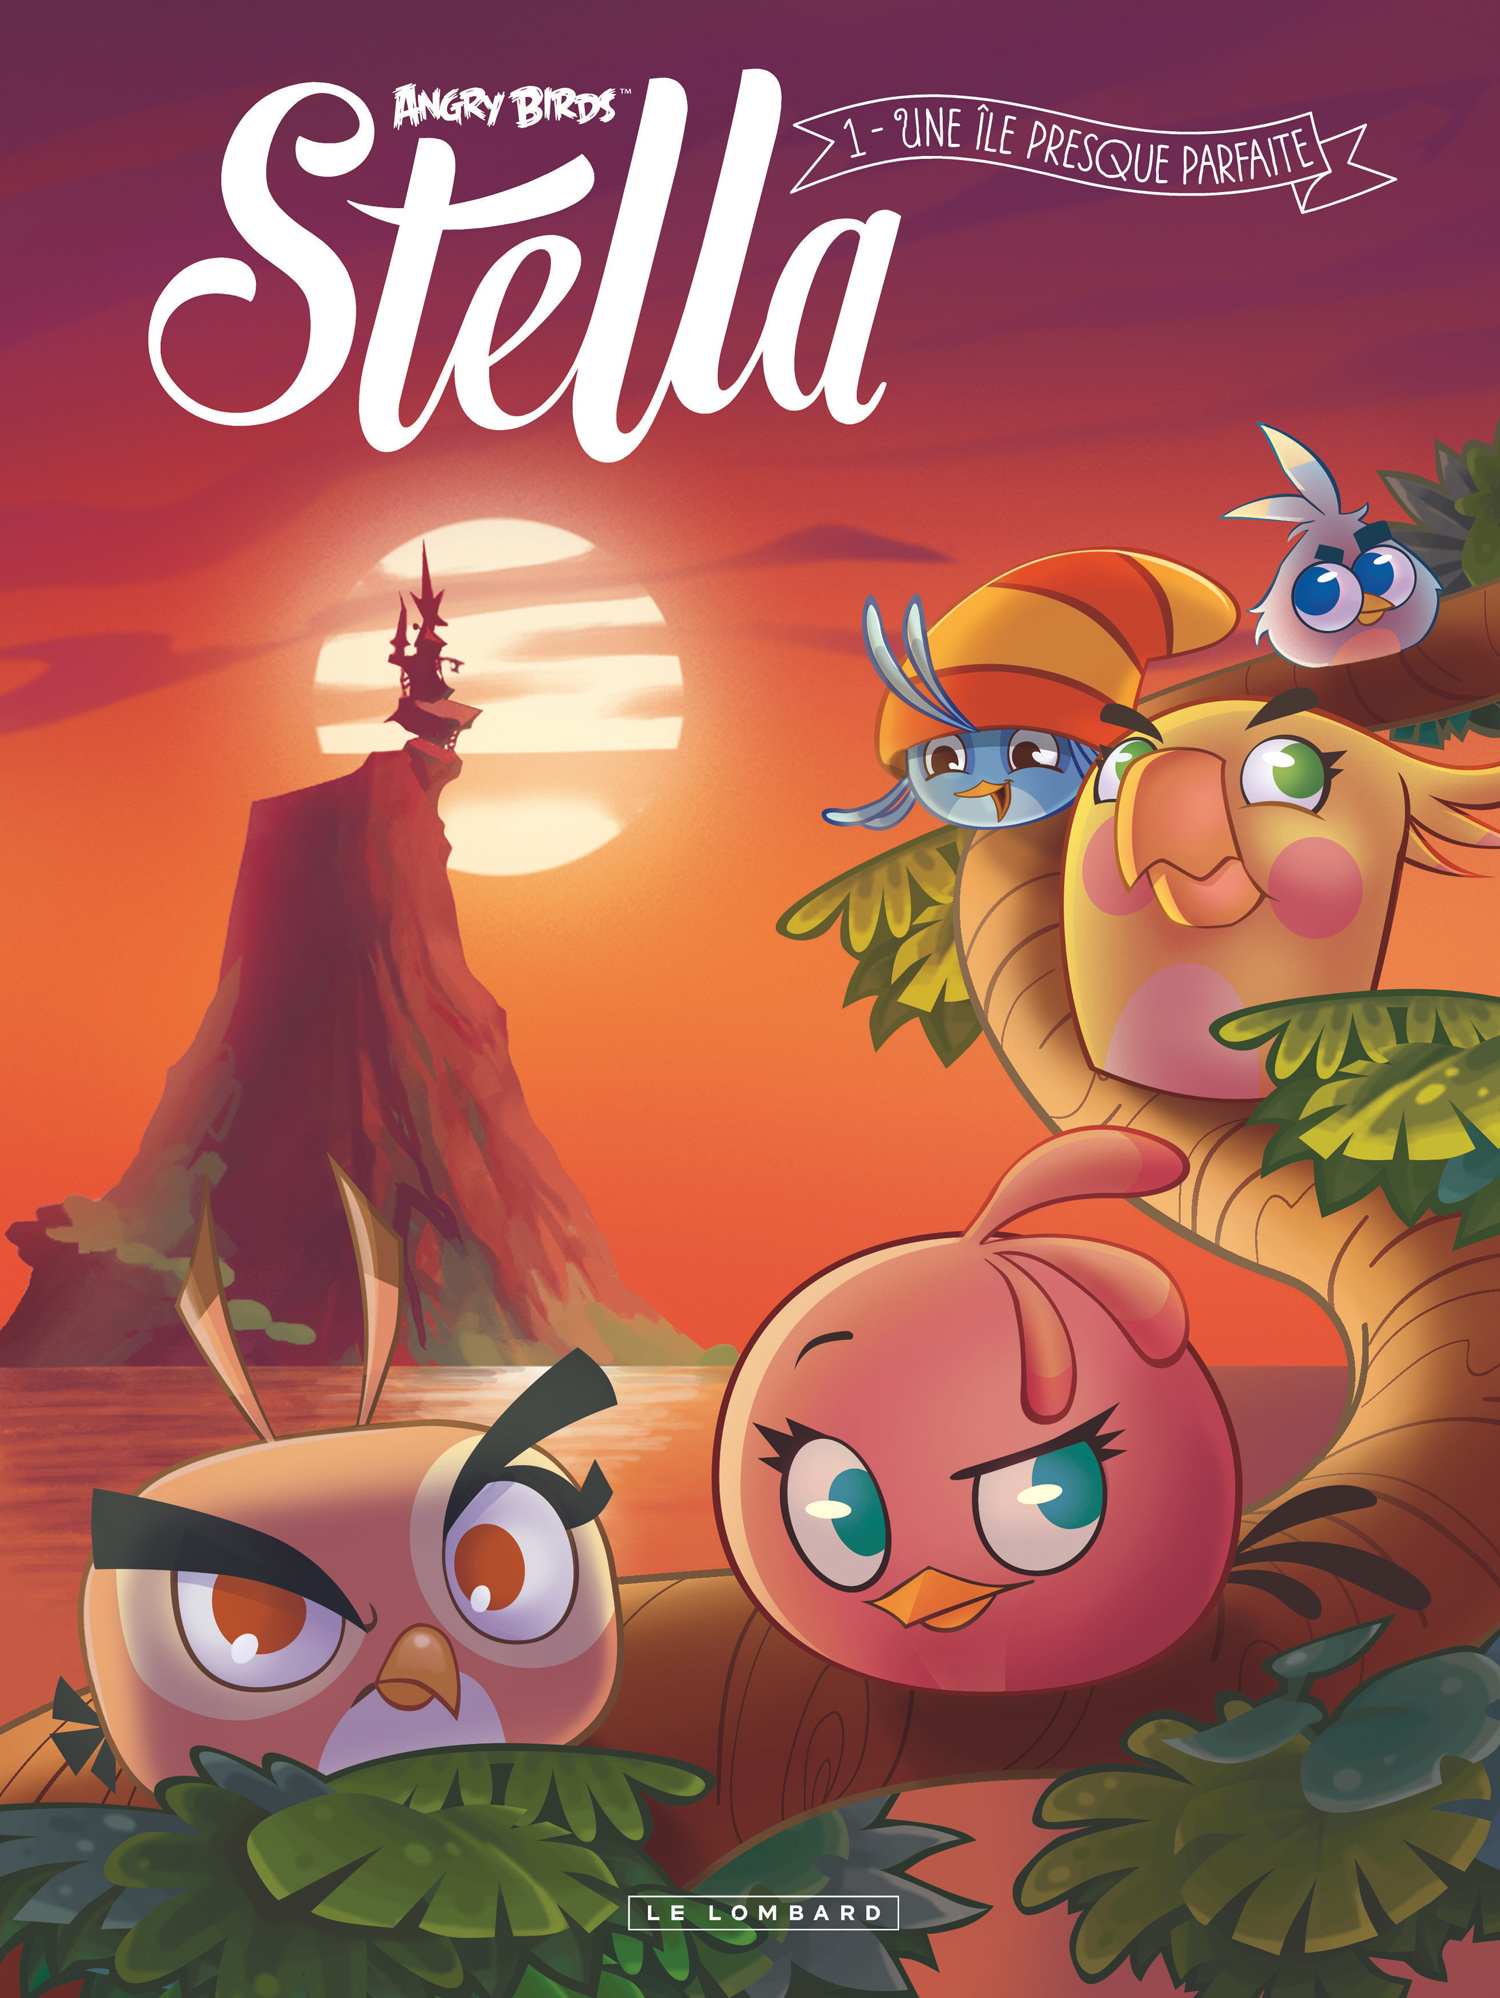 Angry Birds Stella Series) Angry Birds Wiki